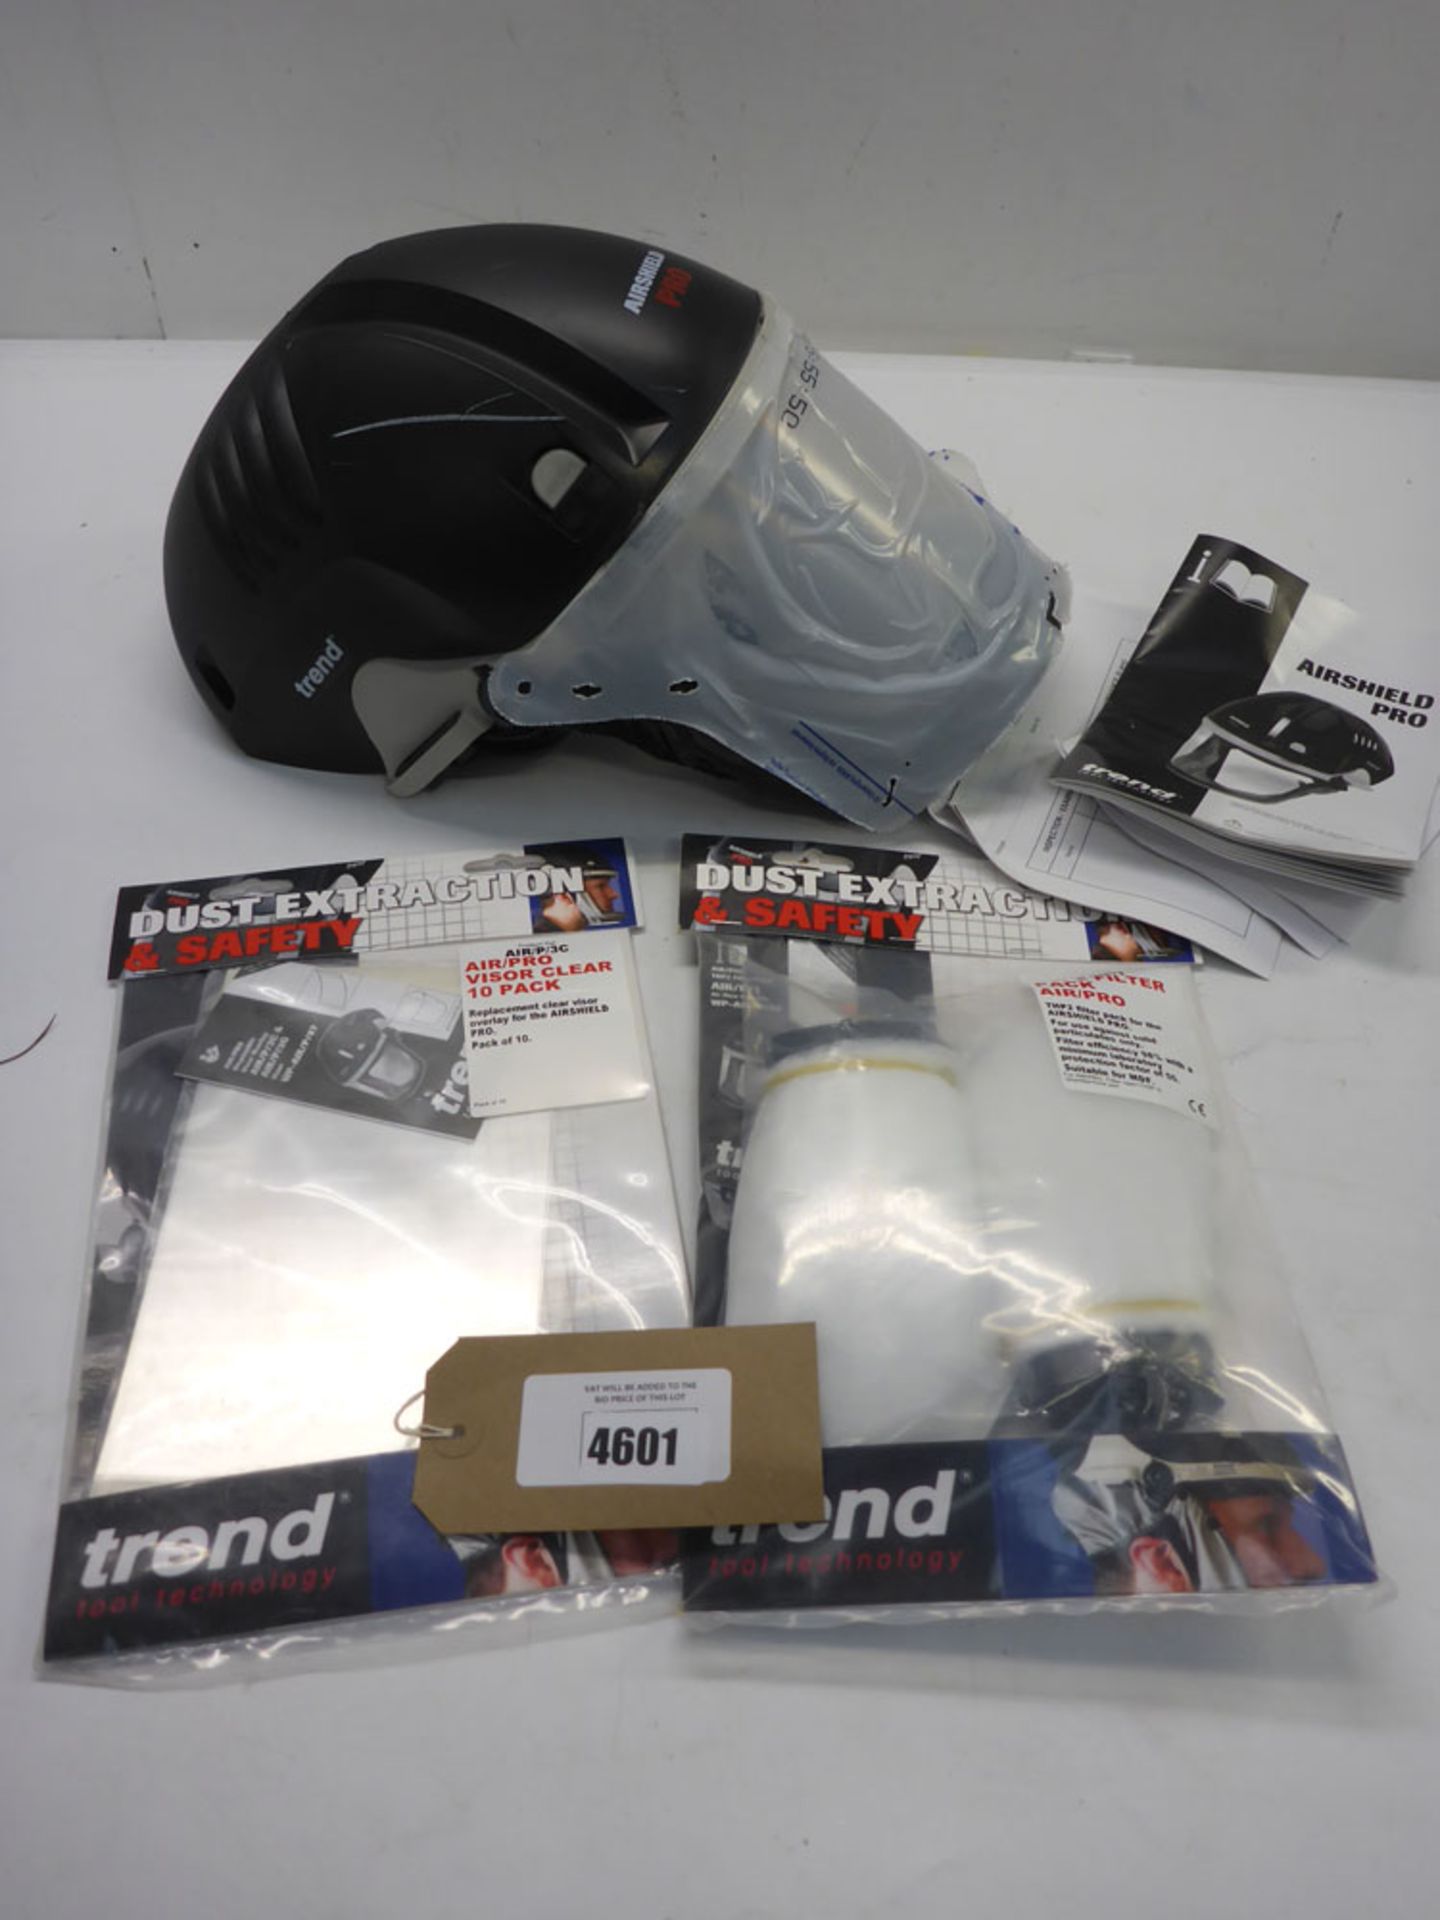 Trend Air shield Pro Respirator and filter packs